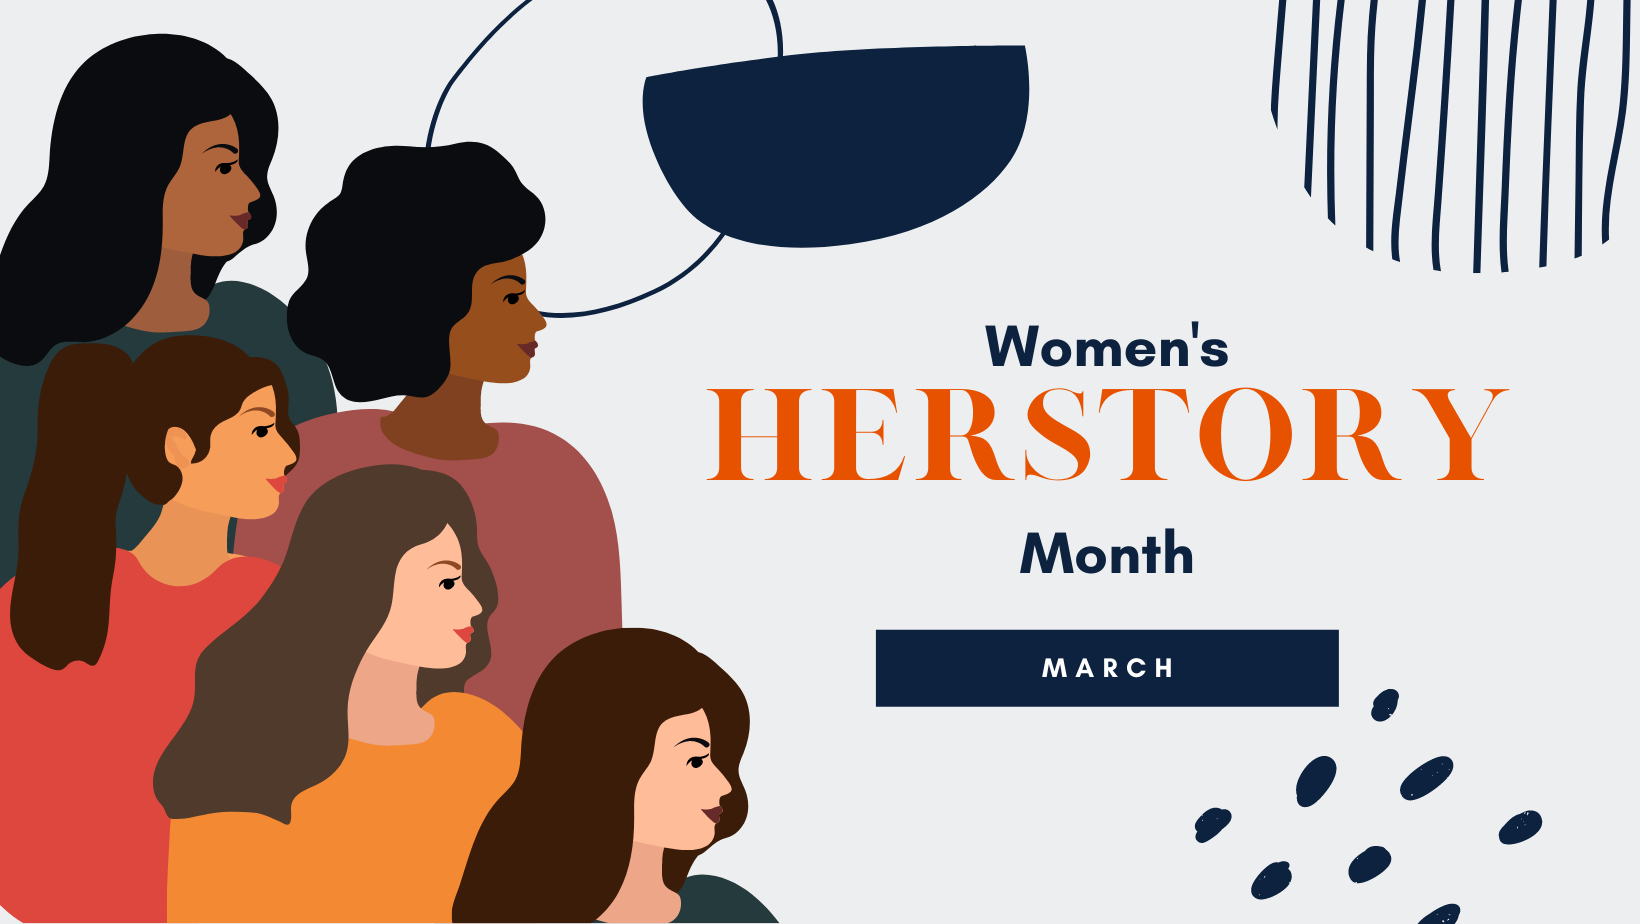 Group of women next to Women's Herstory Month text.